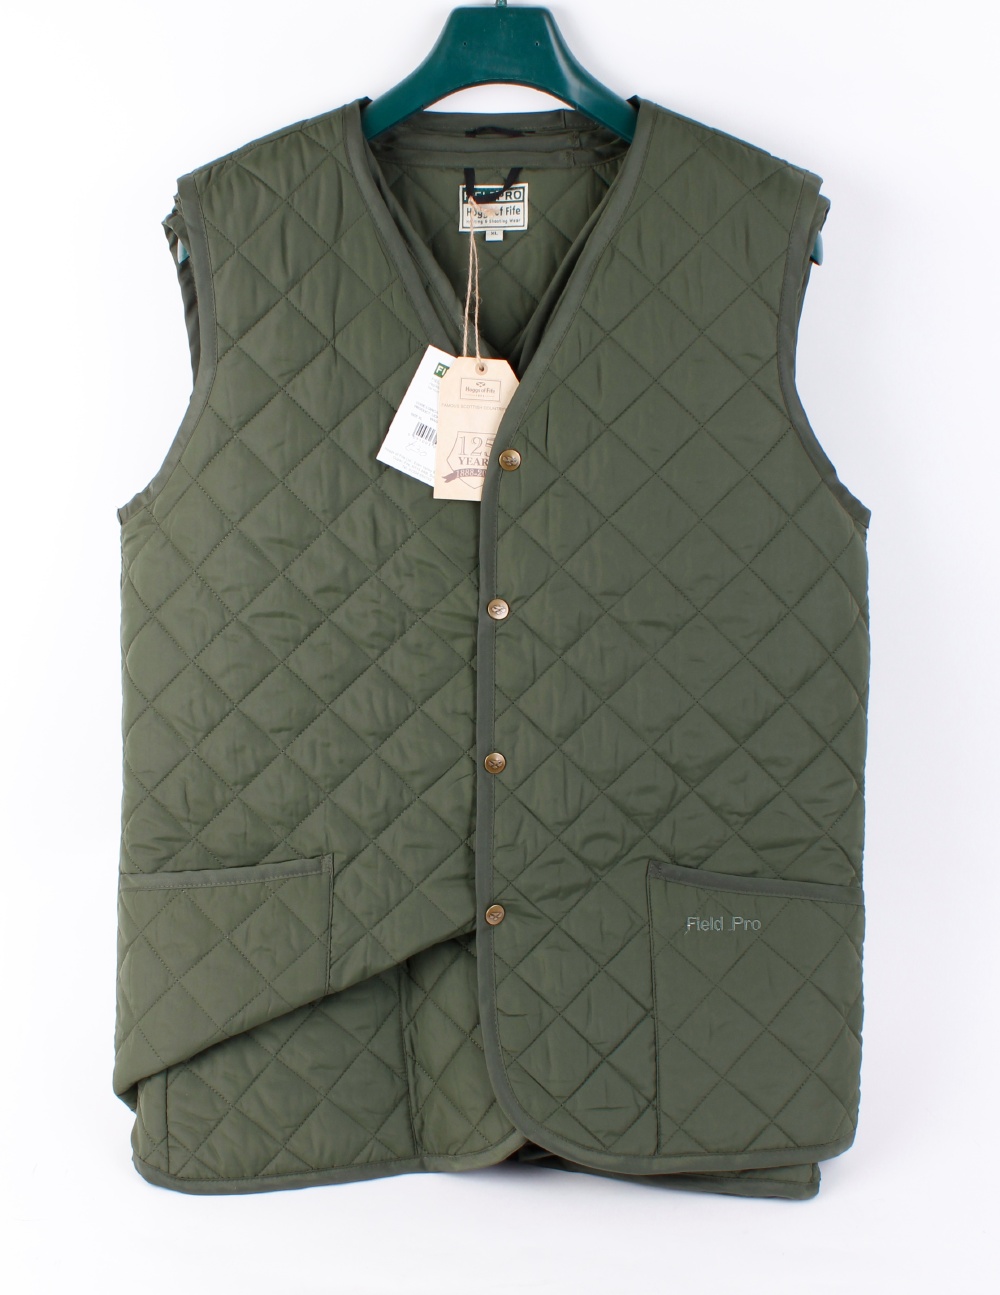 Four Hoggs lightweight quilted waistcoats, in green, size XL, as new with tags